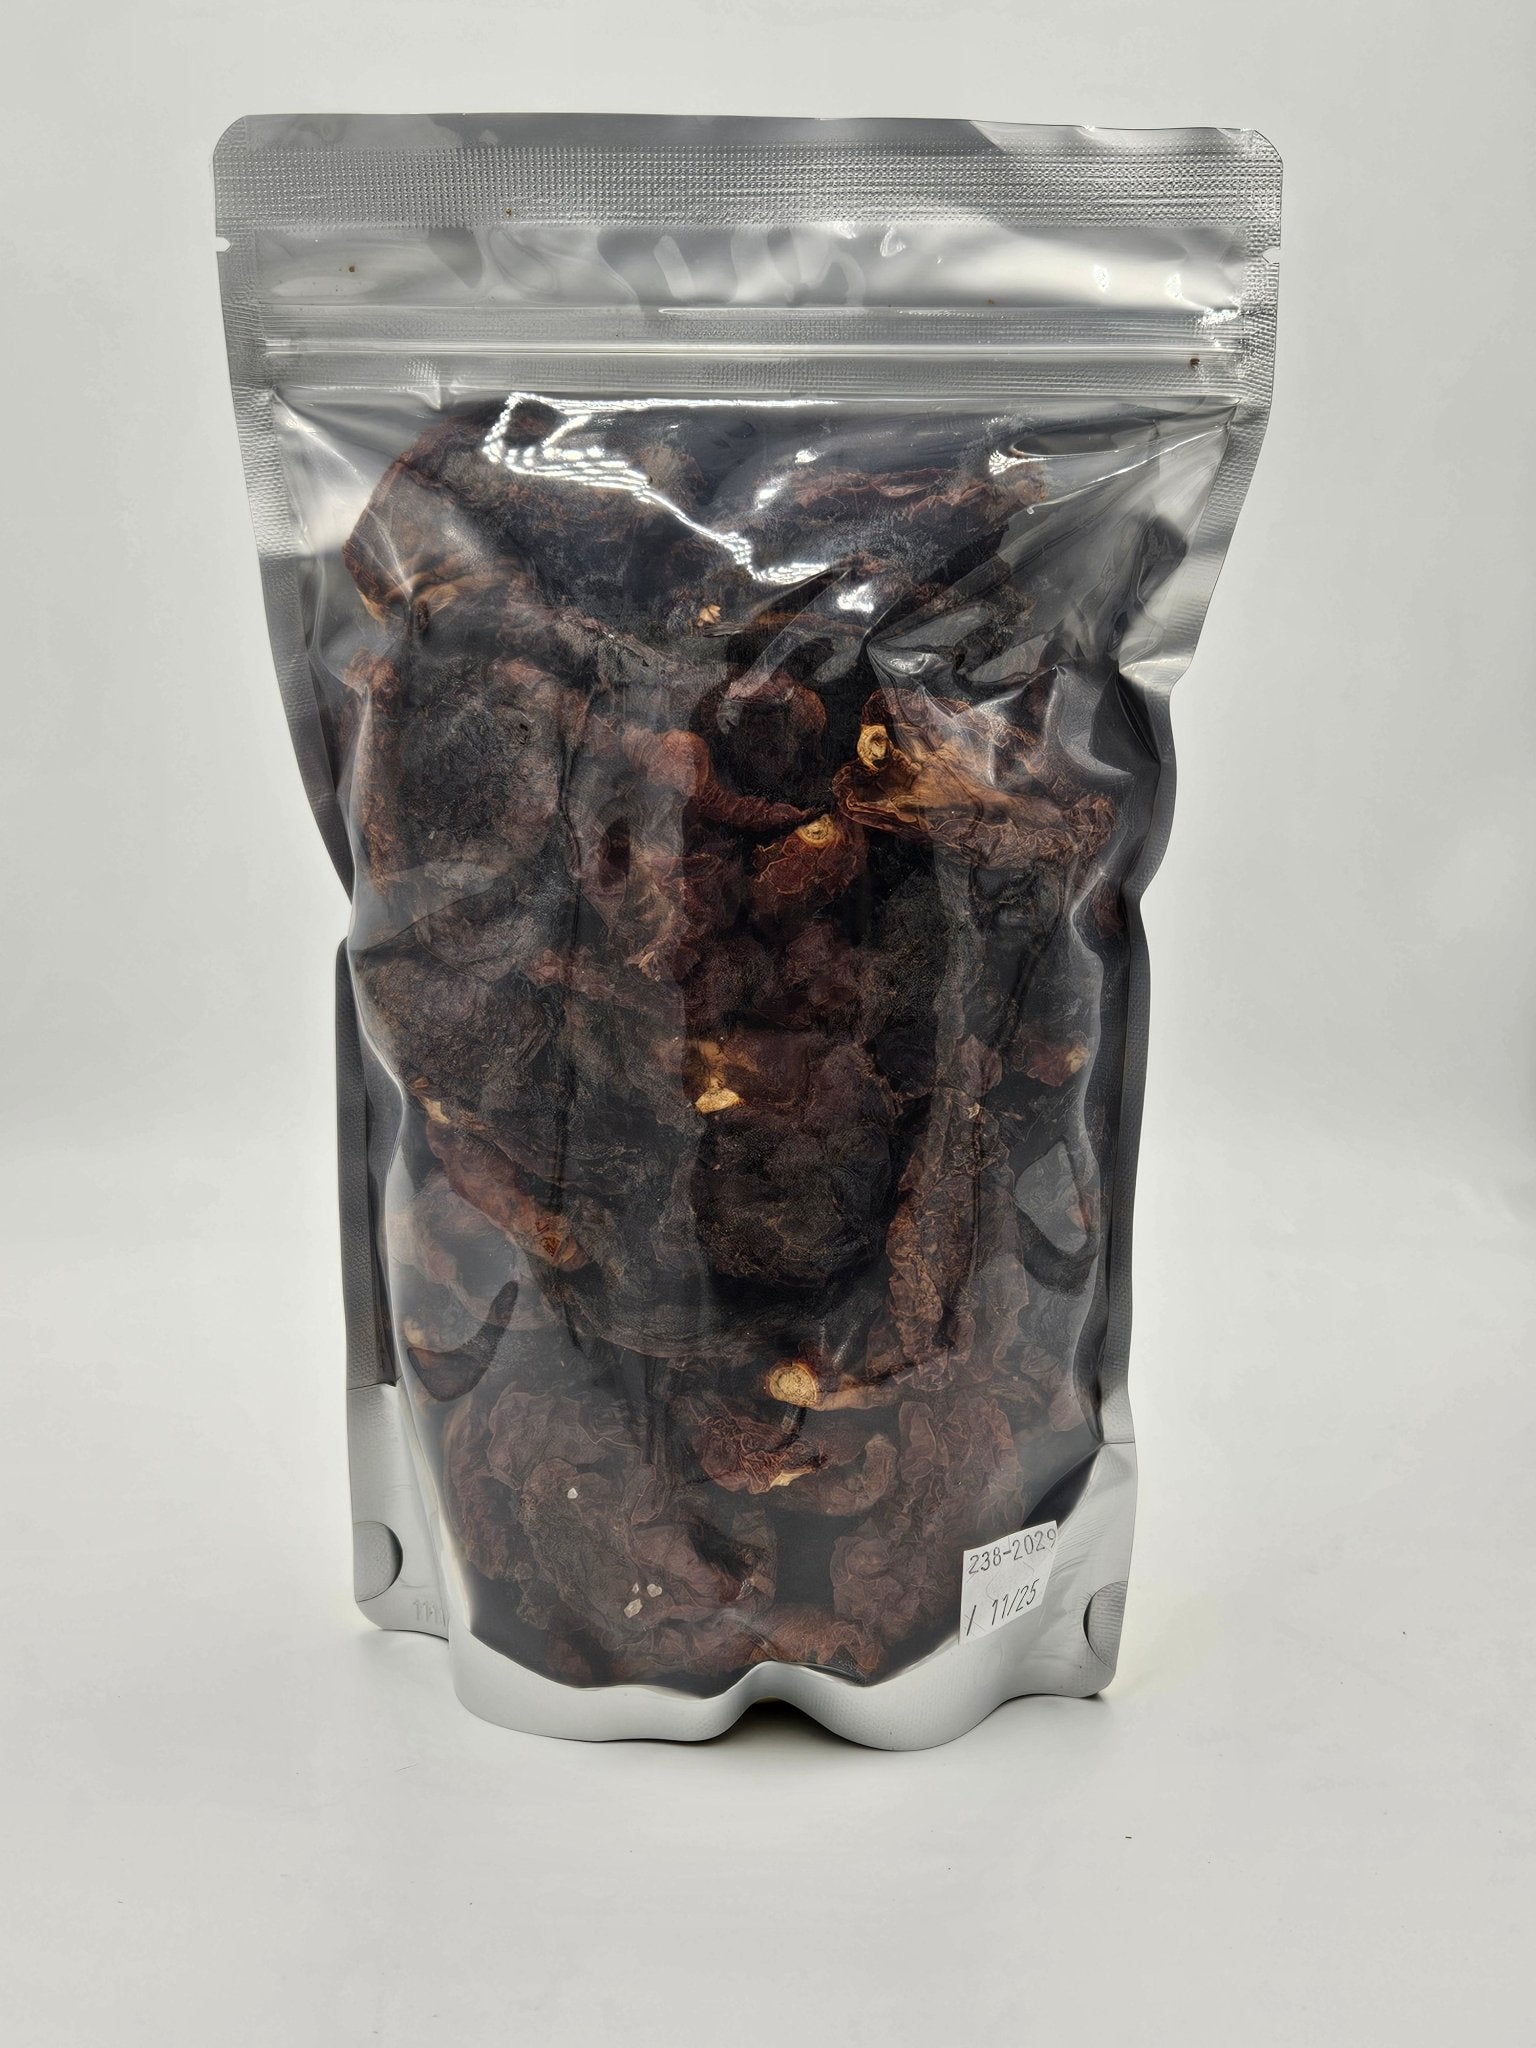 Tomatoes (Sun-Dried, Sea Salted) 16 oz - Natural Zing